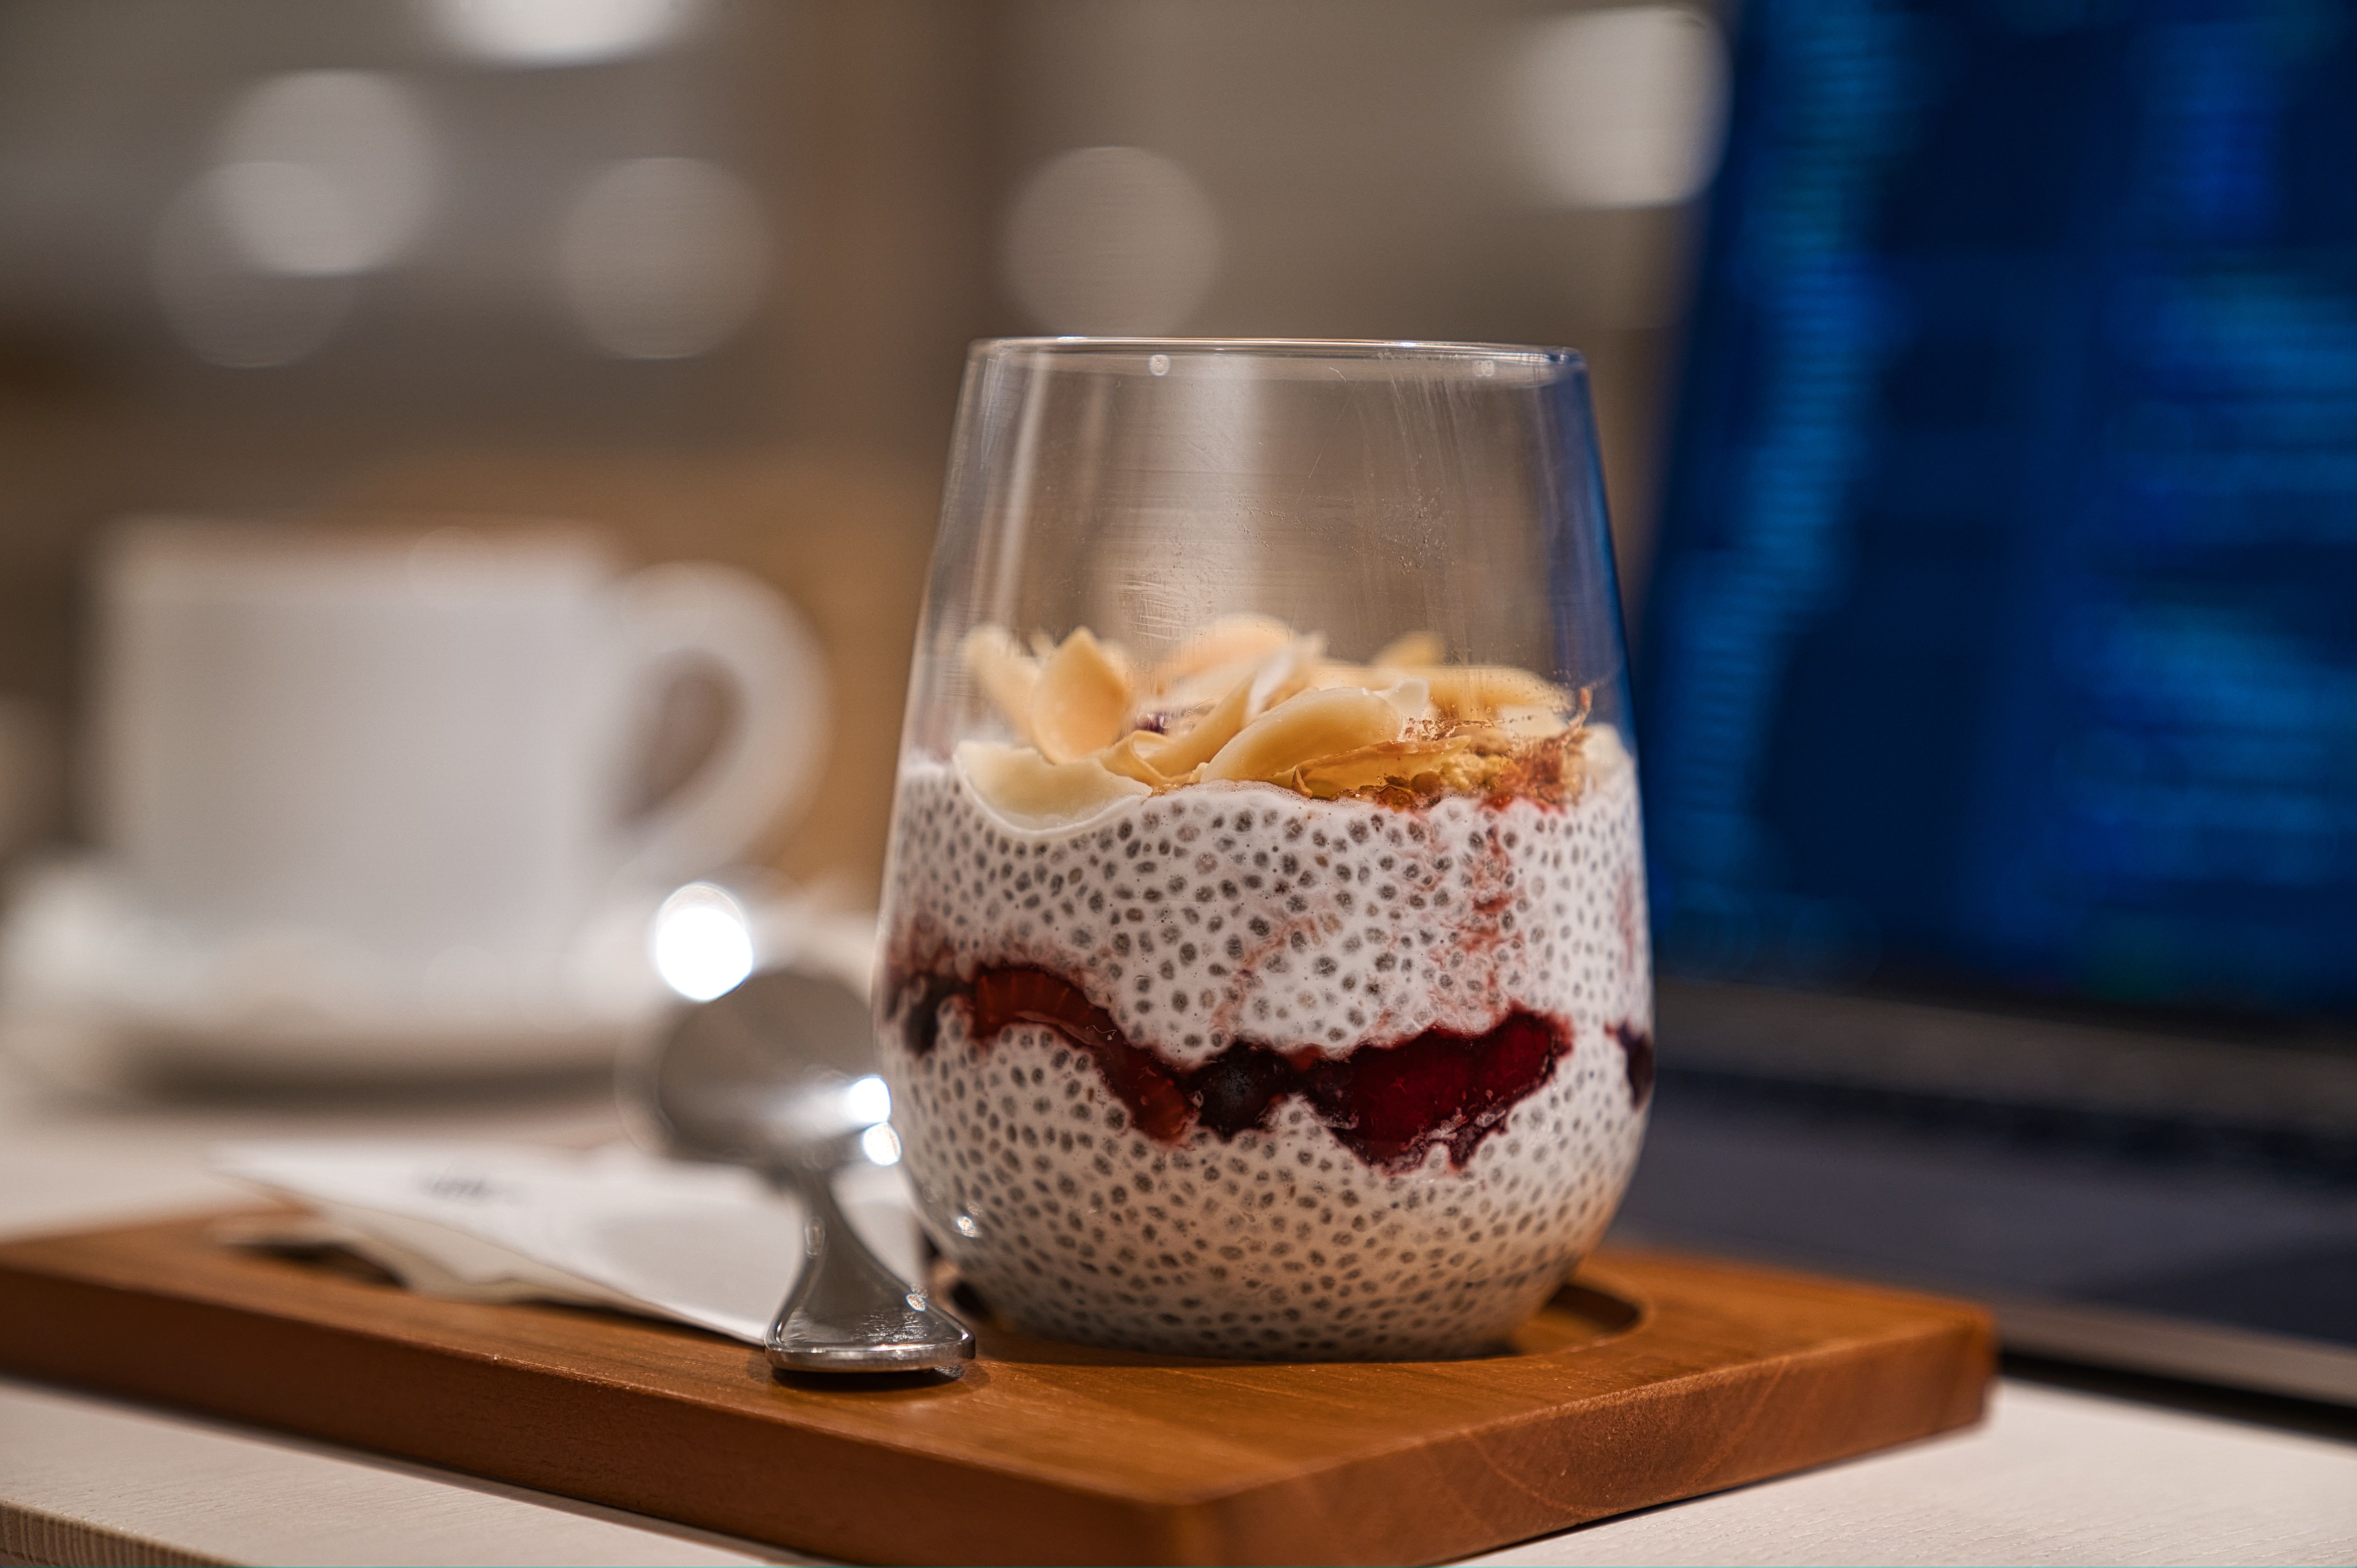 A glass full of Queen Garnet Zesty Chia Pudding sitting on a table with a spoon alongside